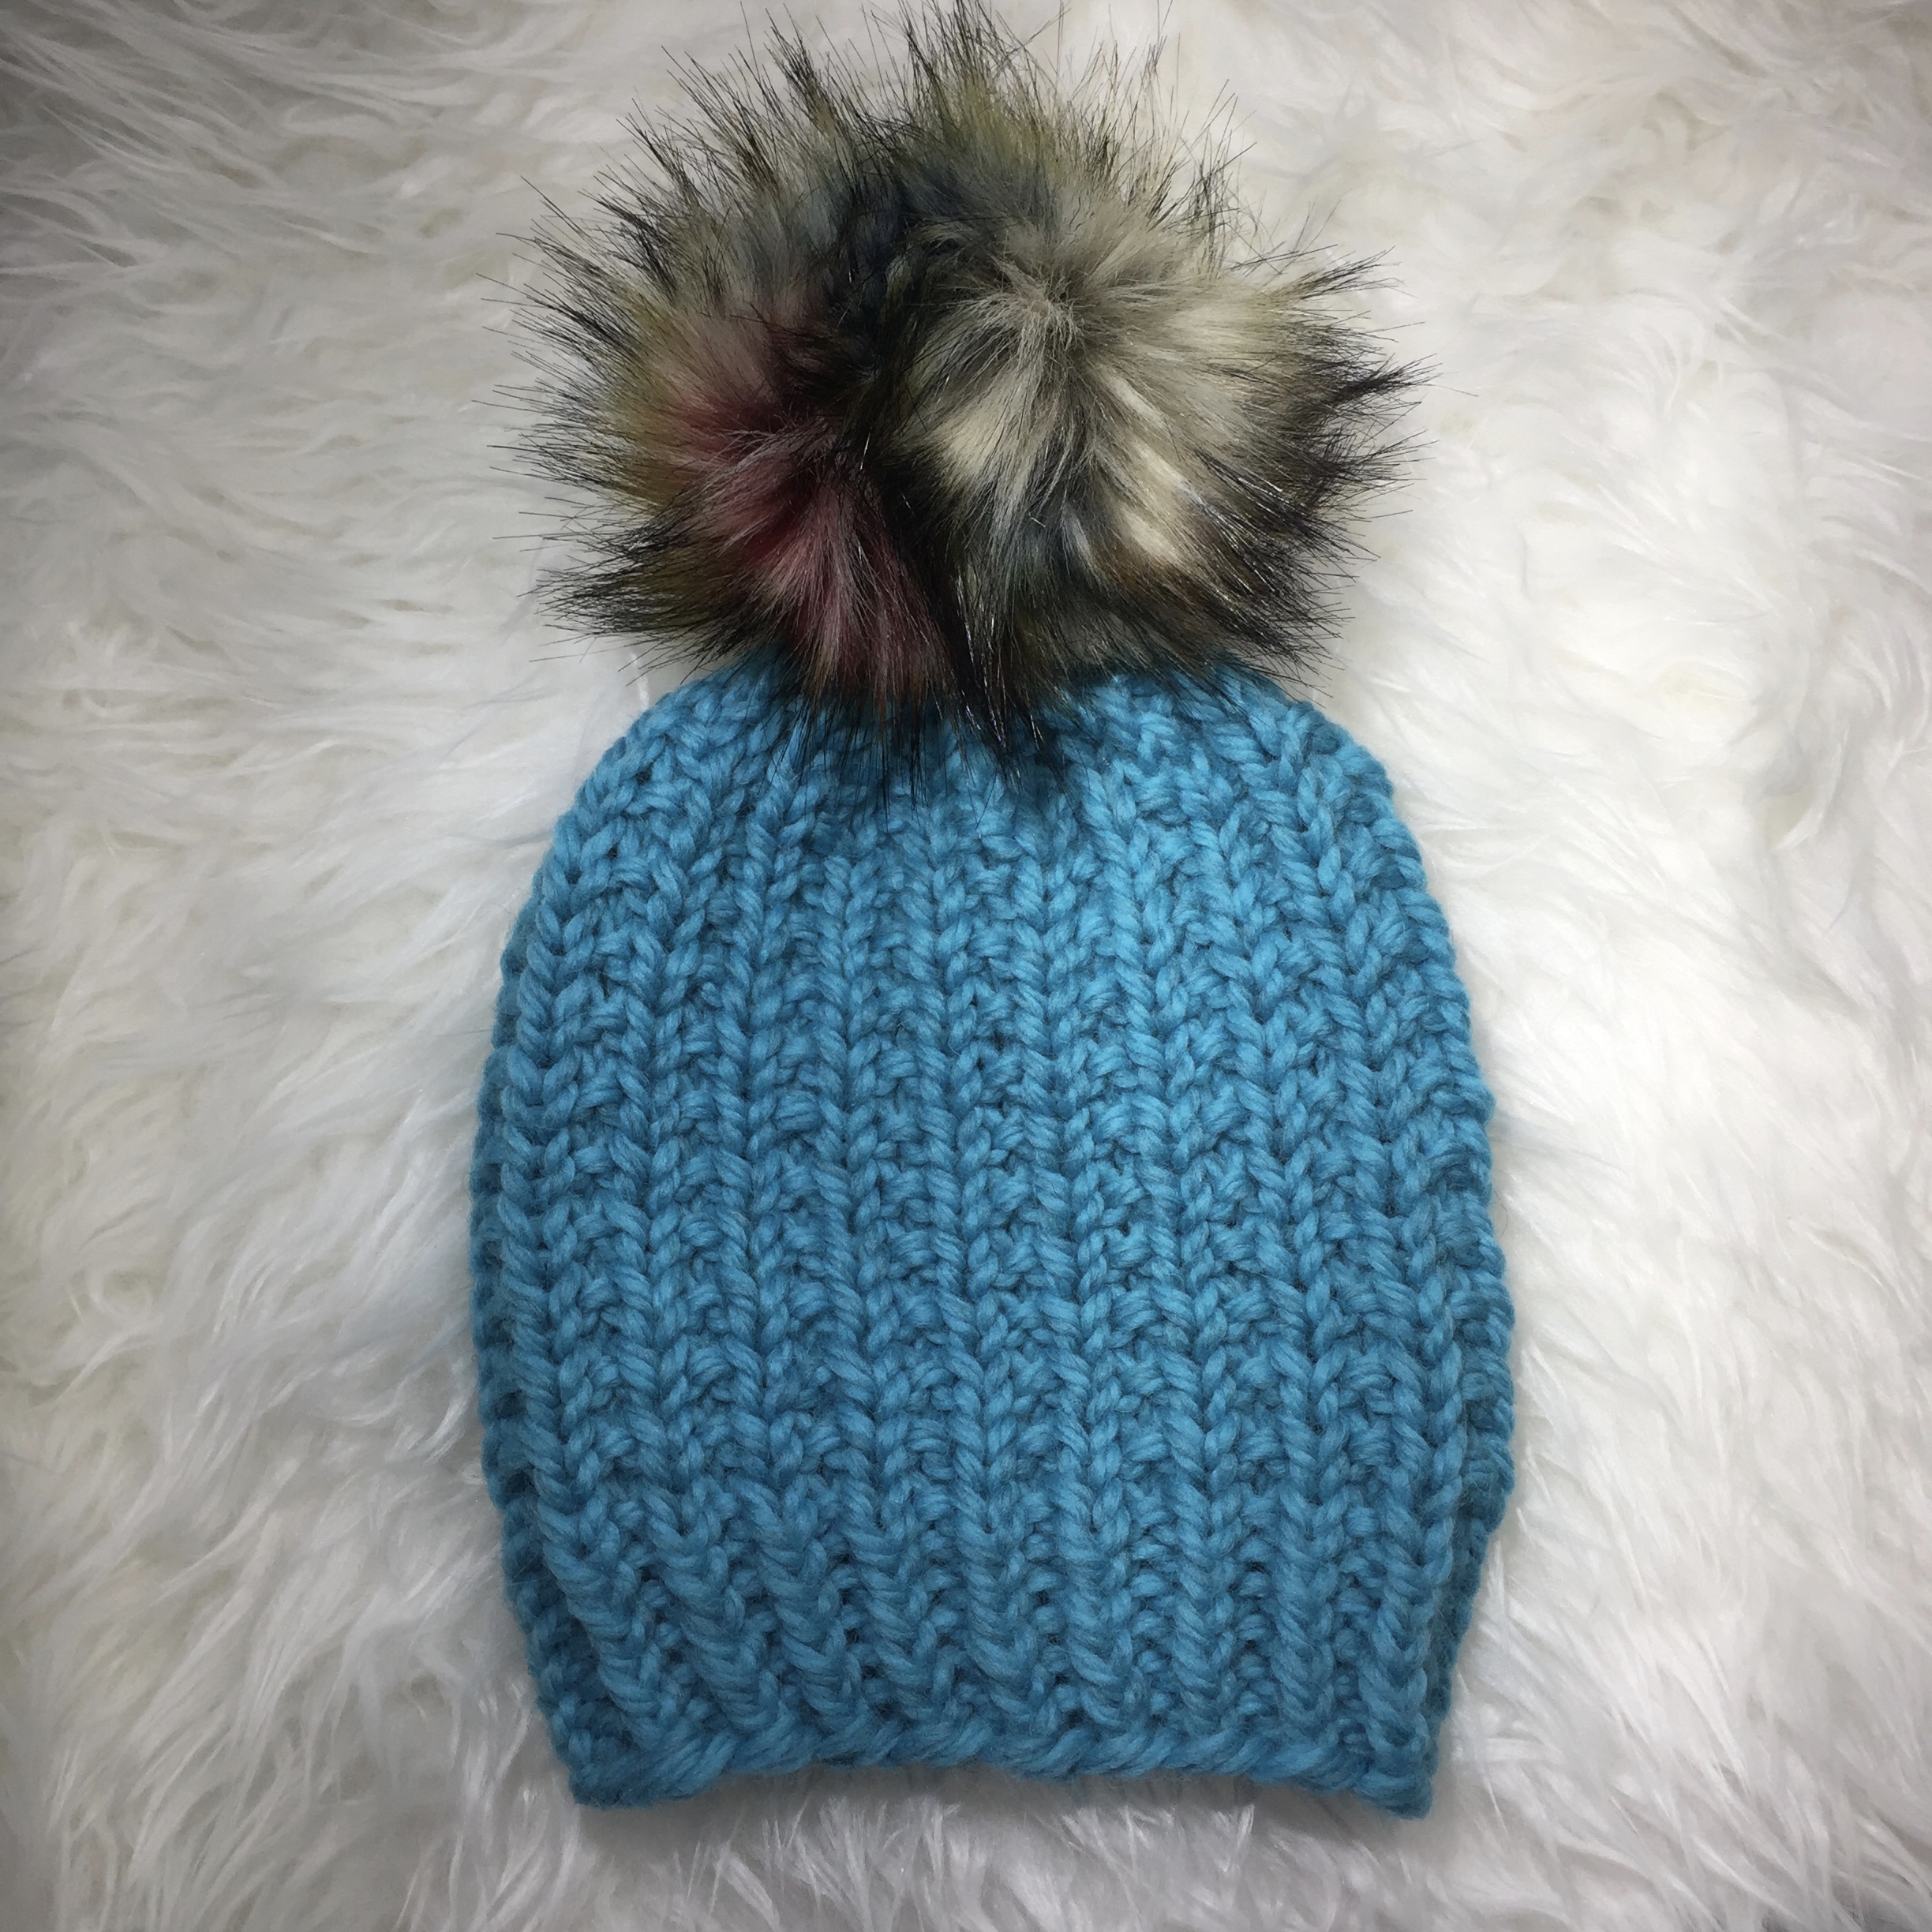 Bottle Cove Hat and Pattern